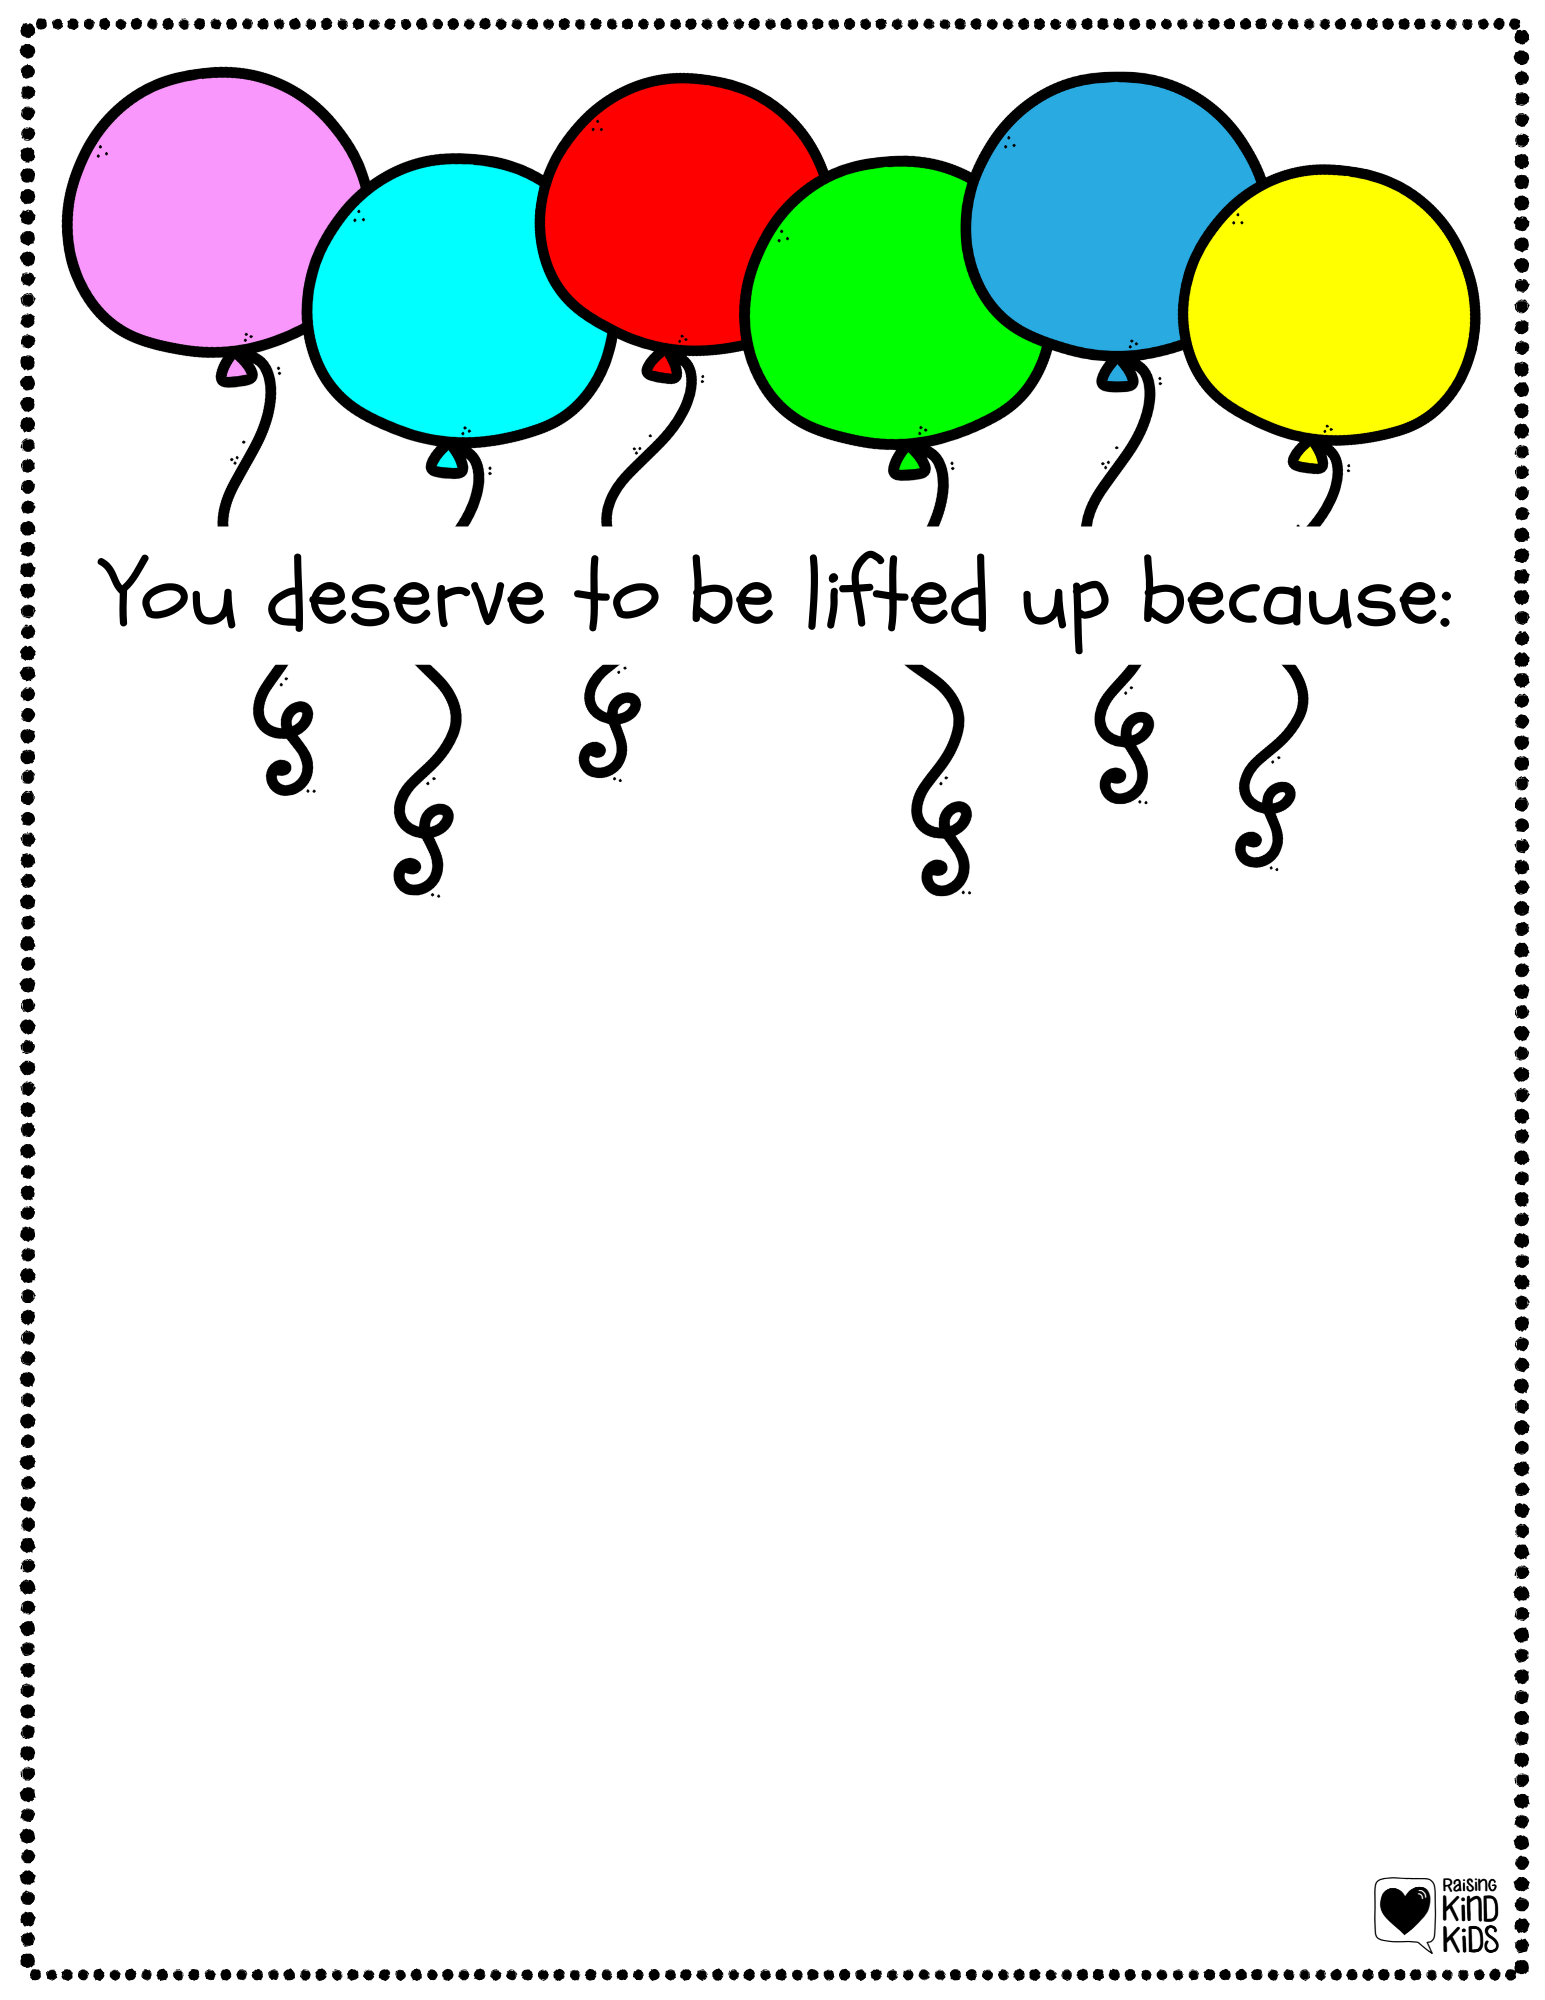 Use these lift up others kindness balloons when someone needs cheering up or cheering on. 